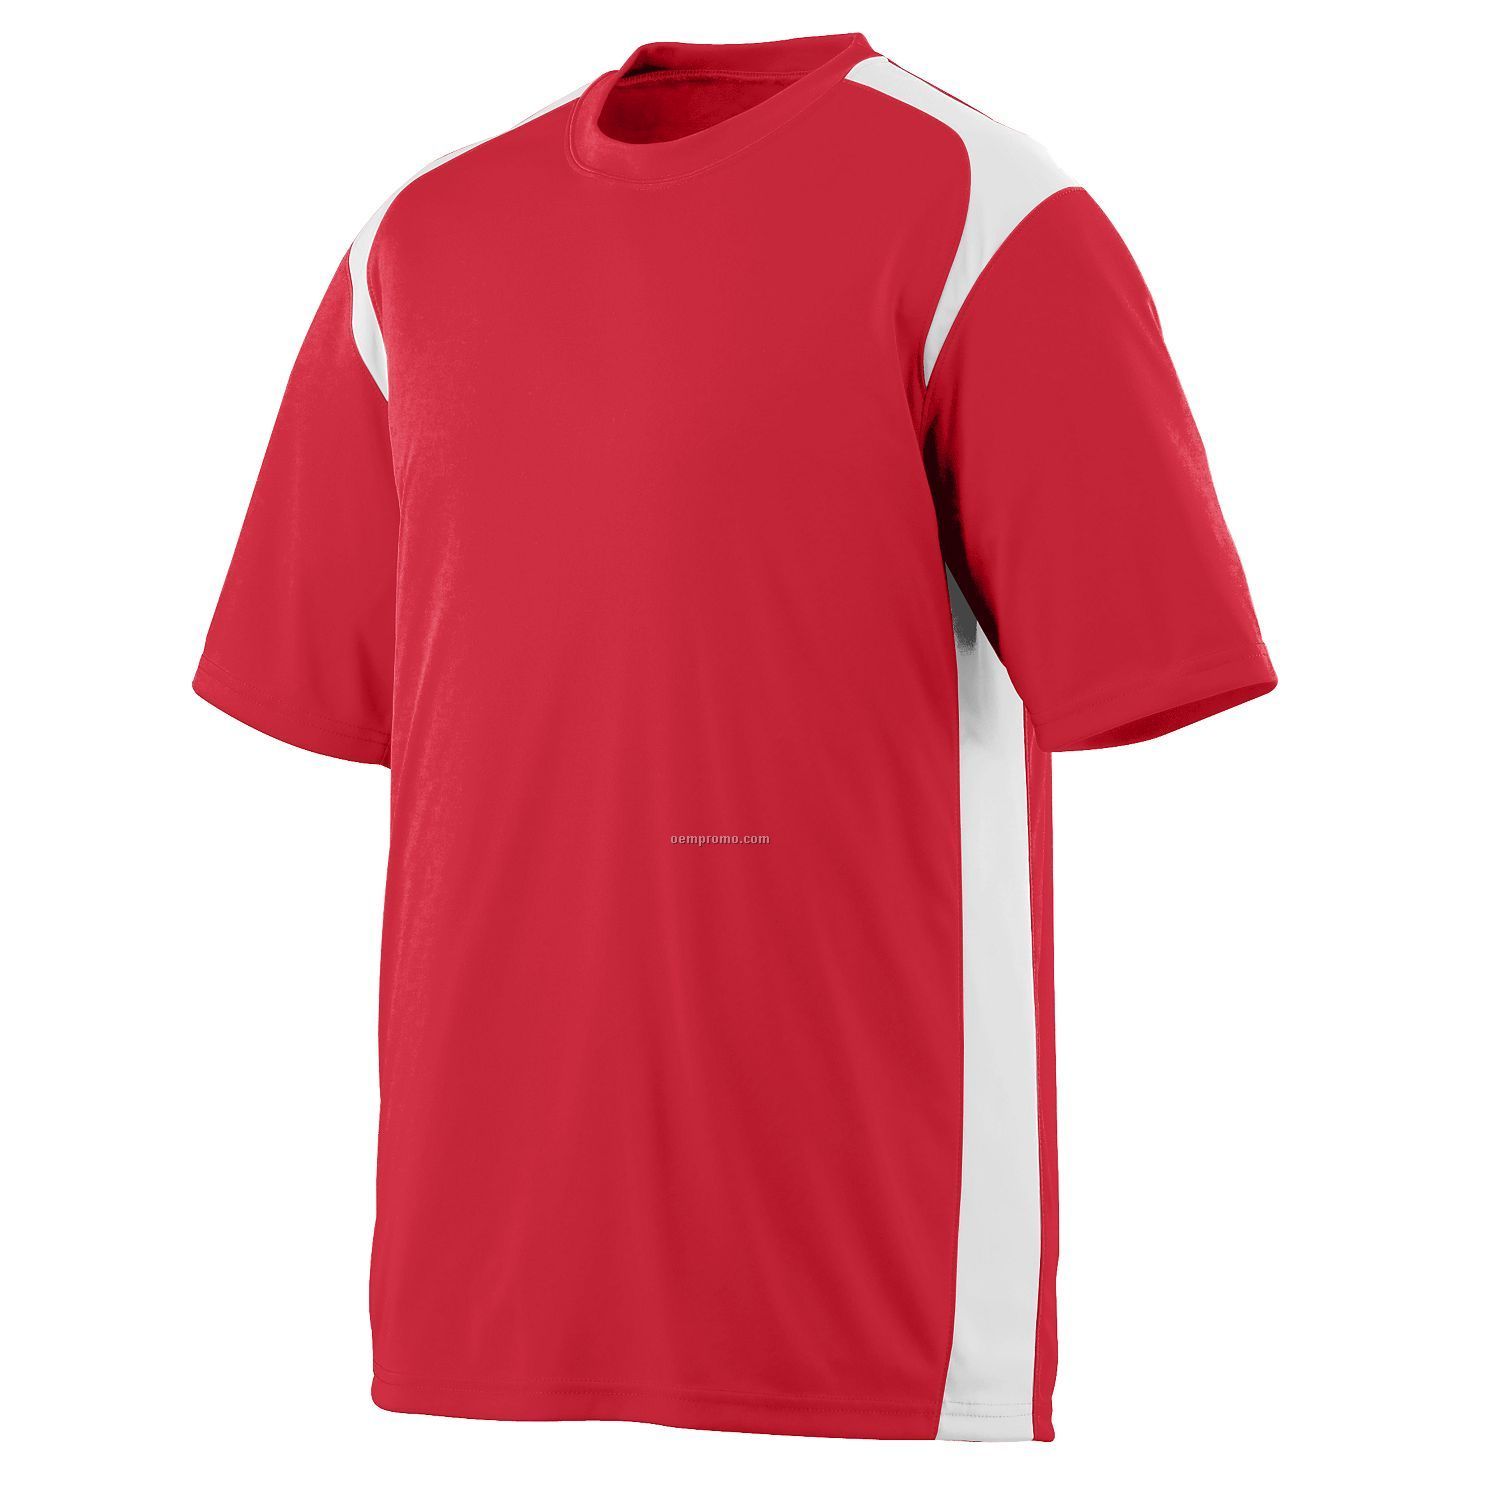 Wicking/Antimicrobial Gameday Performance Crew Shirt